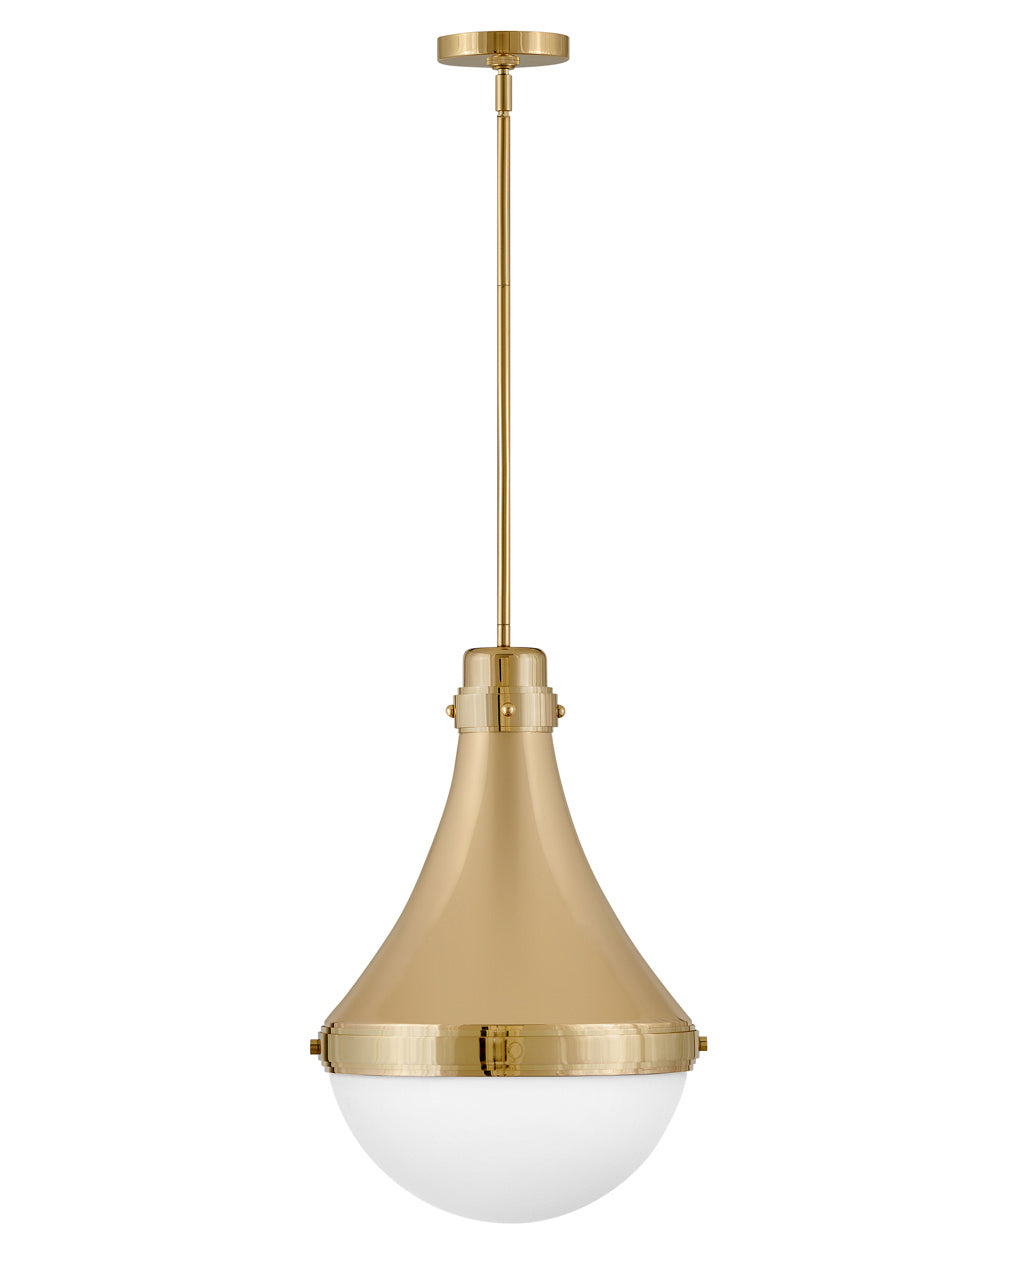 Oliver LED Pendant in Bright Brass